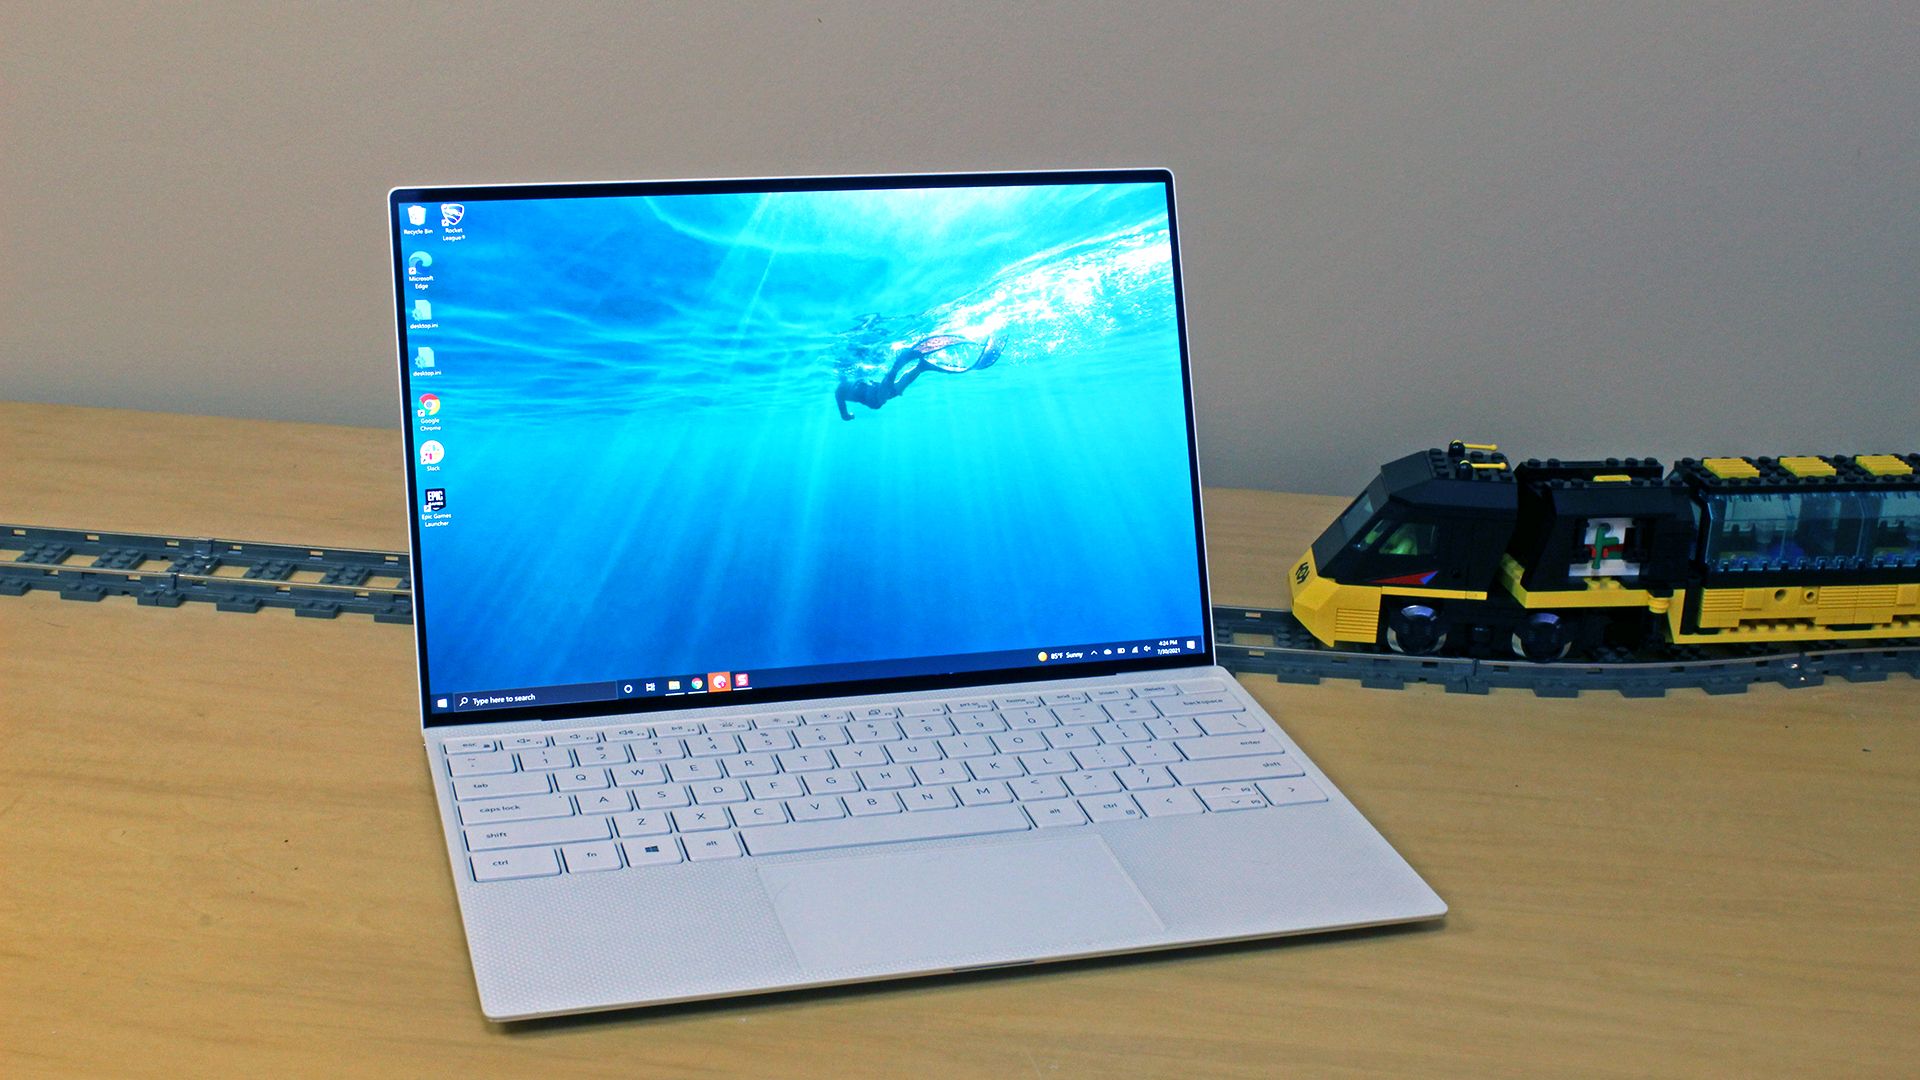 The XPS 13 OLED laptop sitting on a table with a toy train on a traintrack behind it.